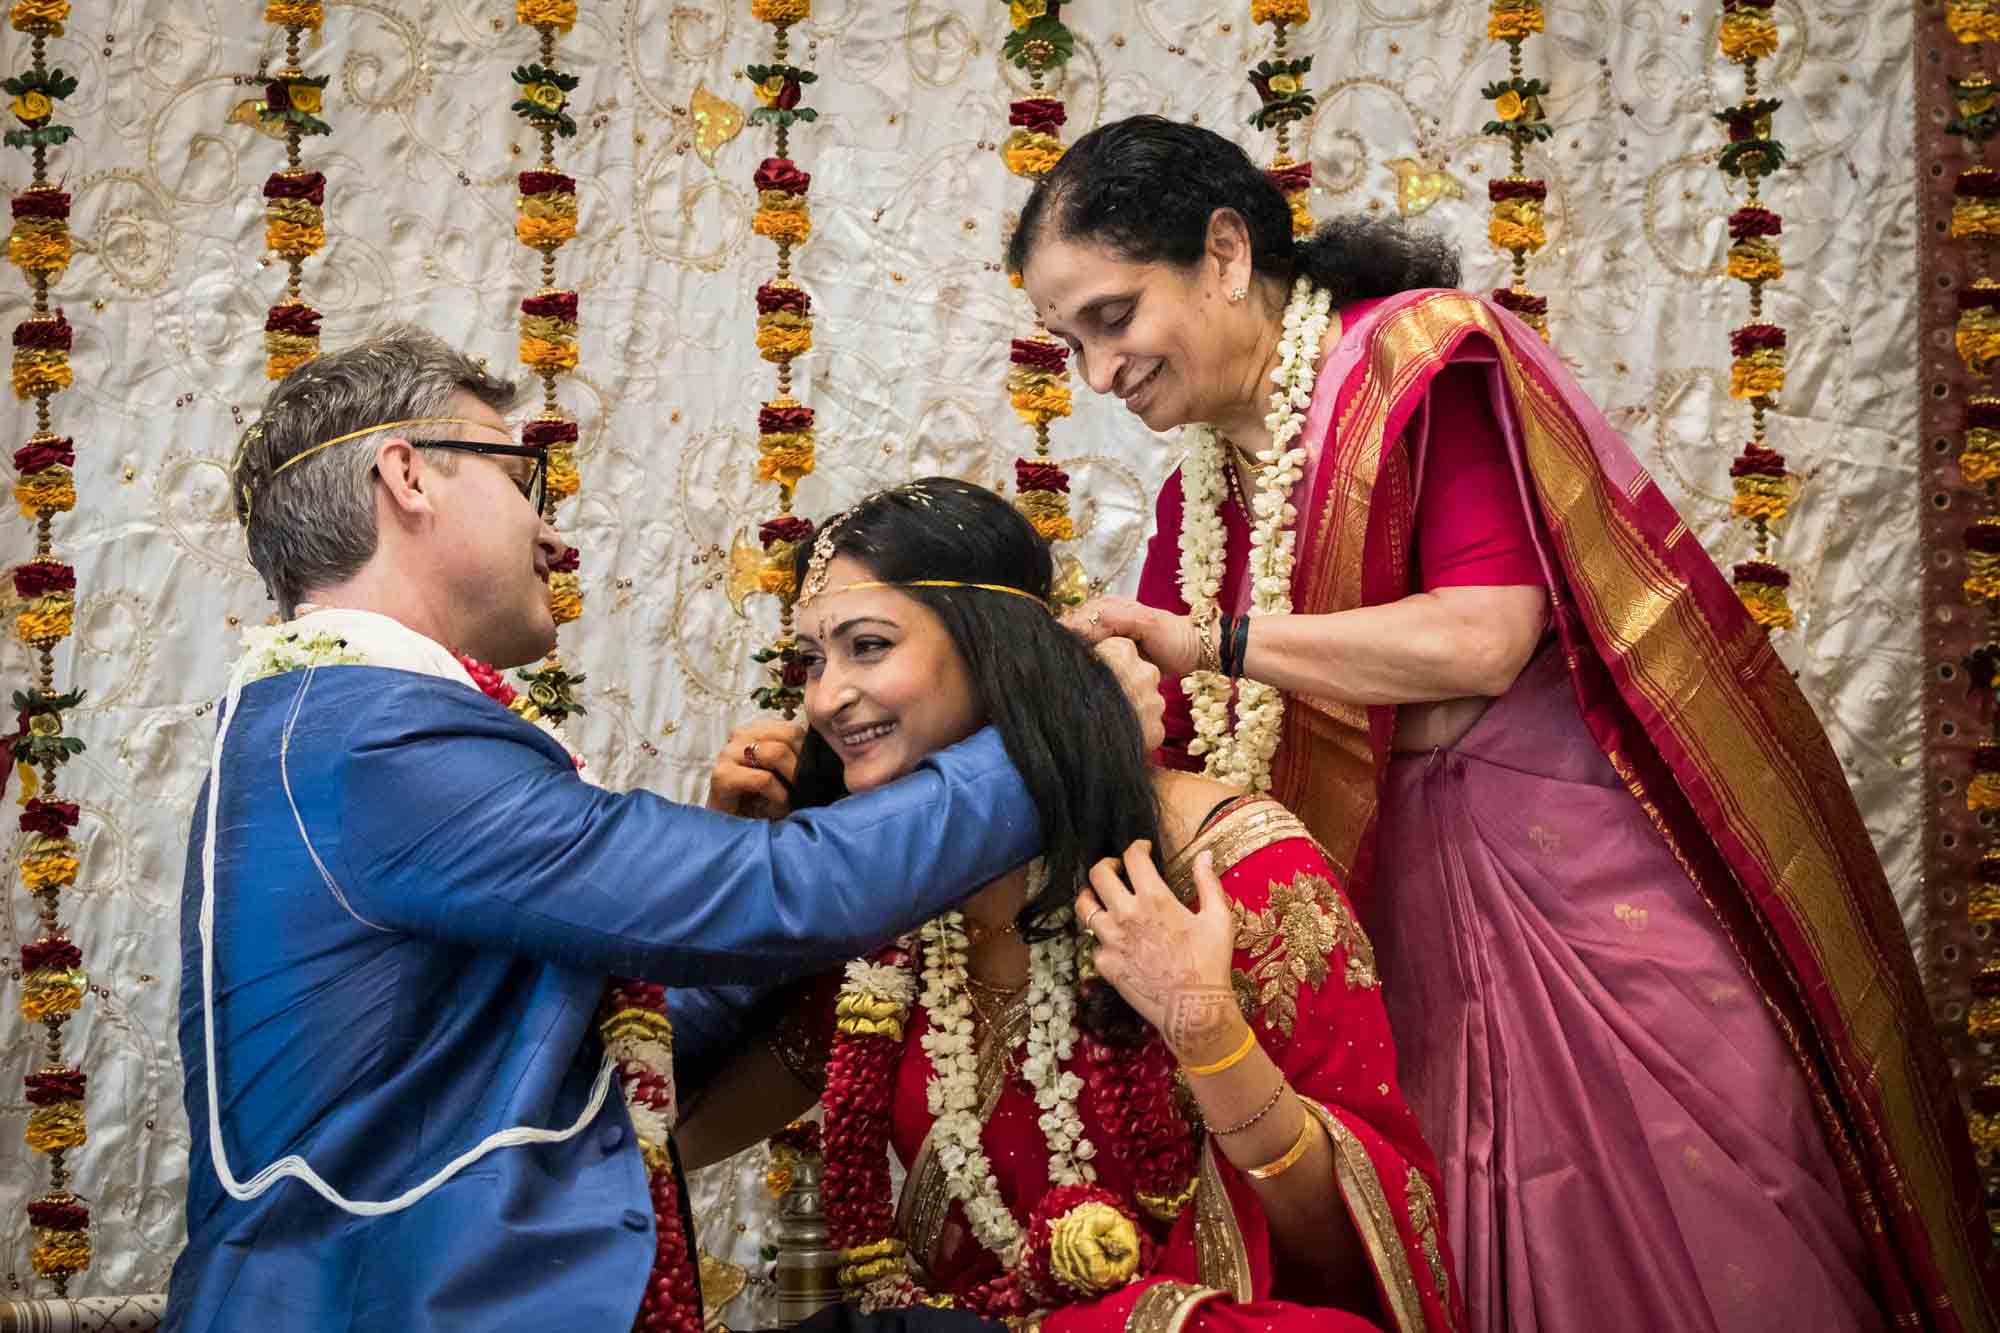 Groom and bride's mother tying necklace on bride at a Ganesha Temple wedding